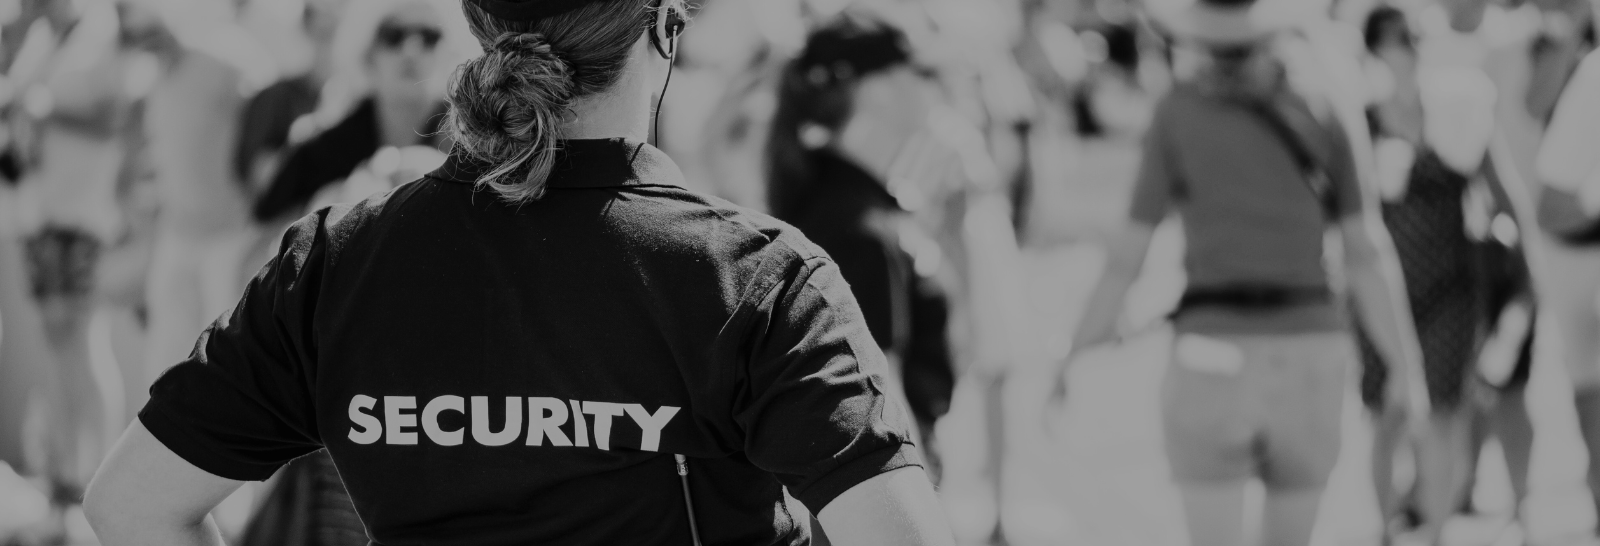 Human Rights and Women in the Private Security Workforce